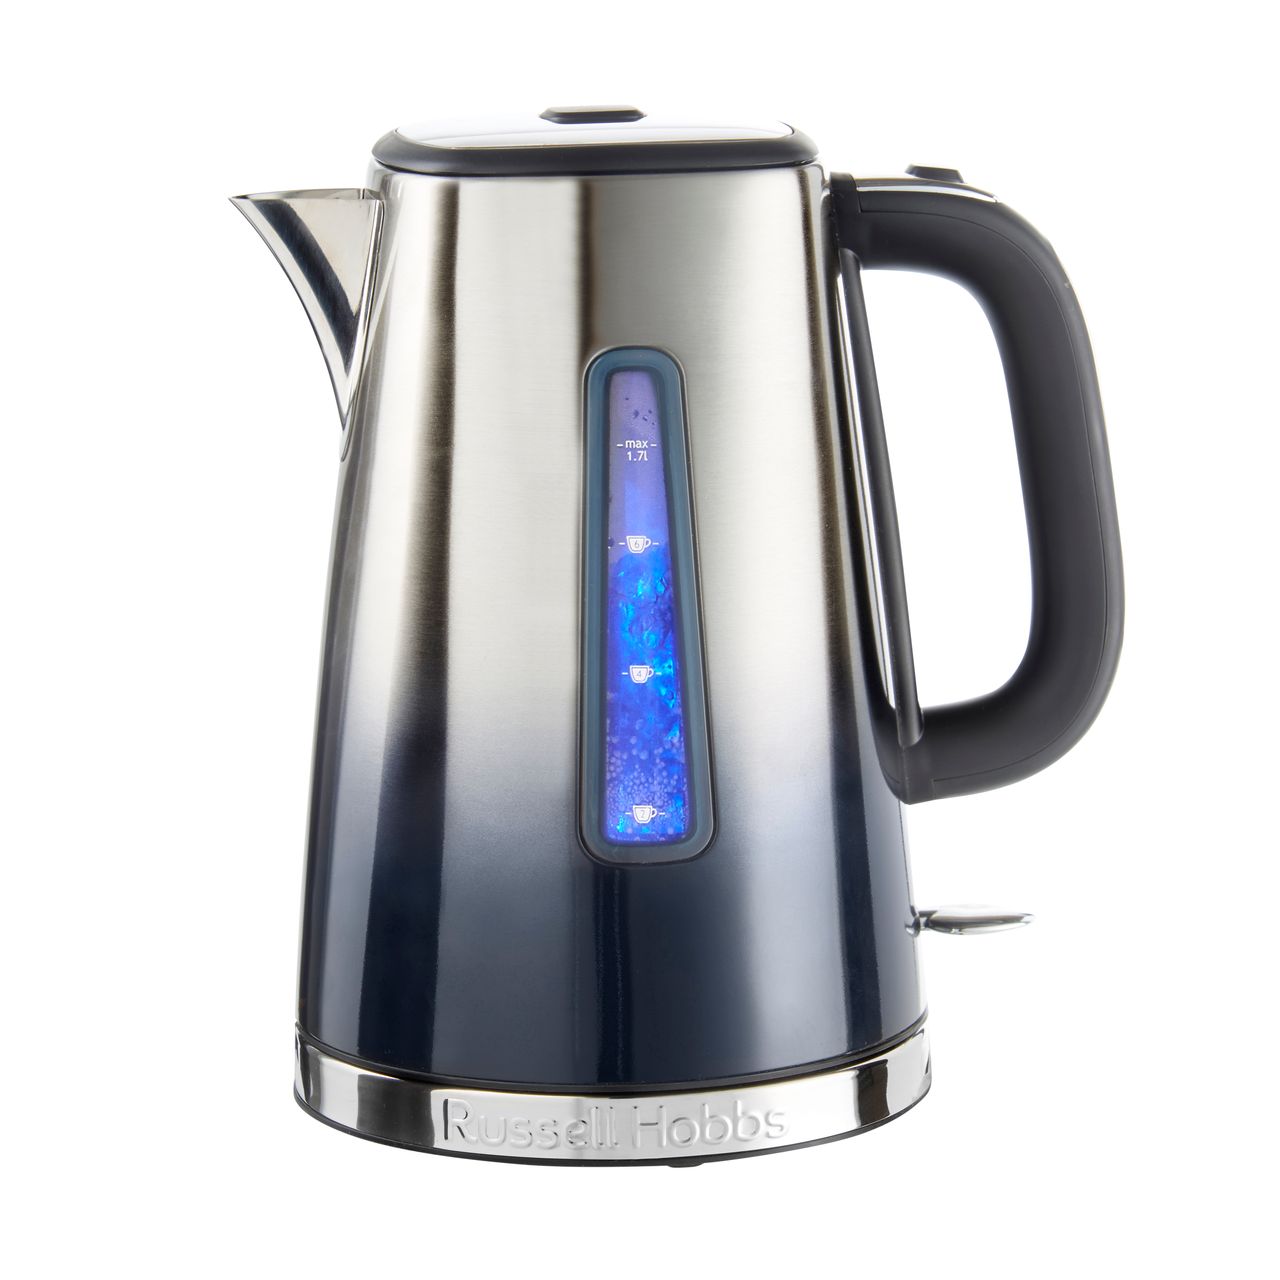 Russell Hobbs Eclipse 25111 Kettle Review